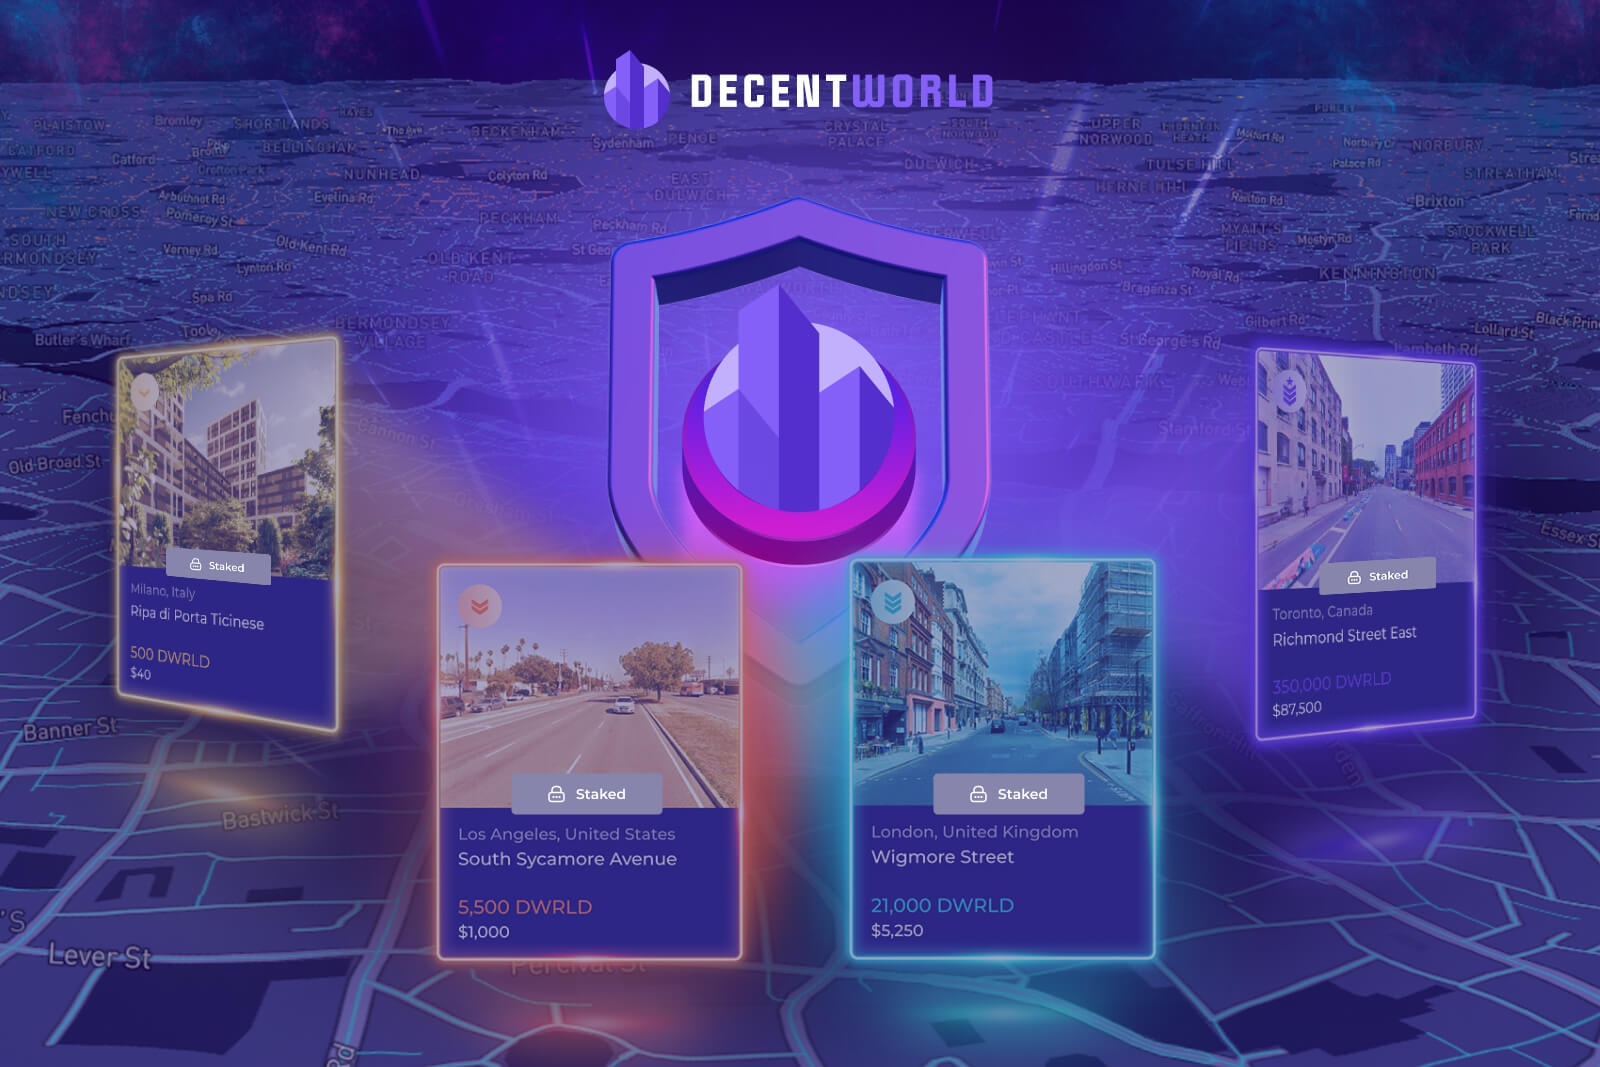 DecentWorld map in the background, collection cards